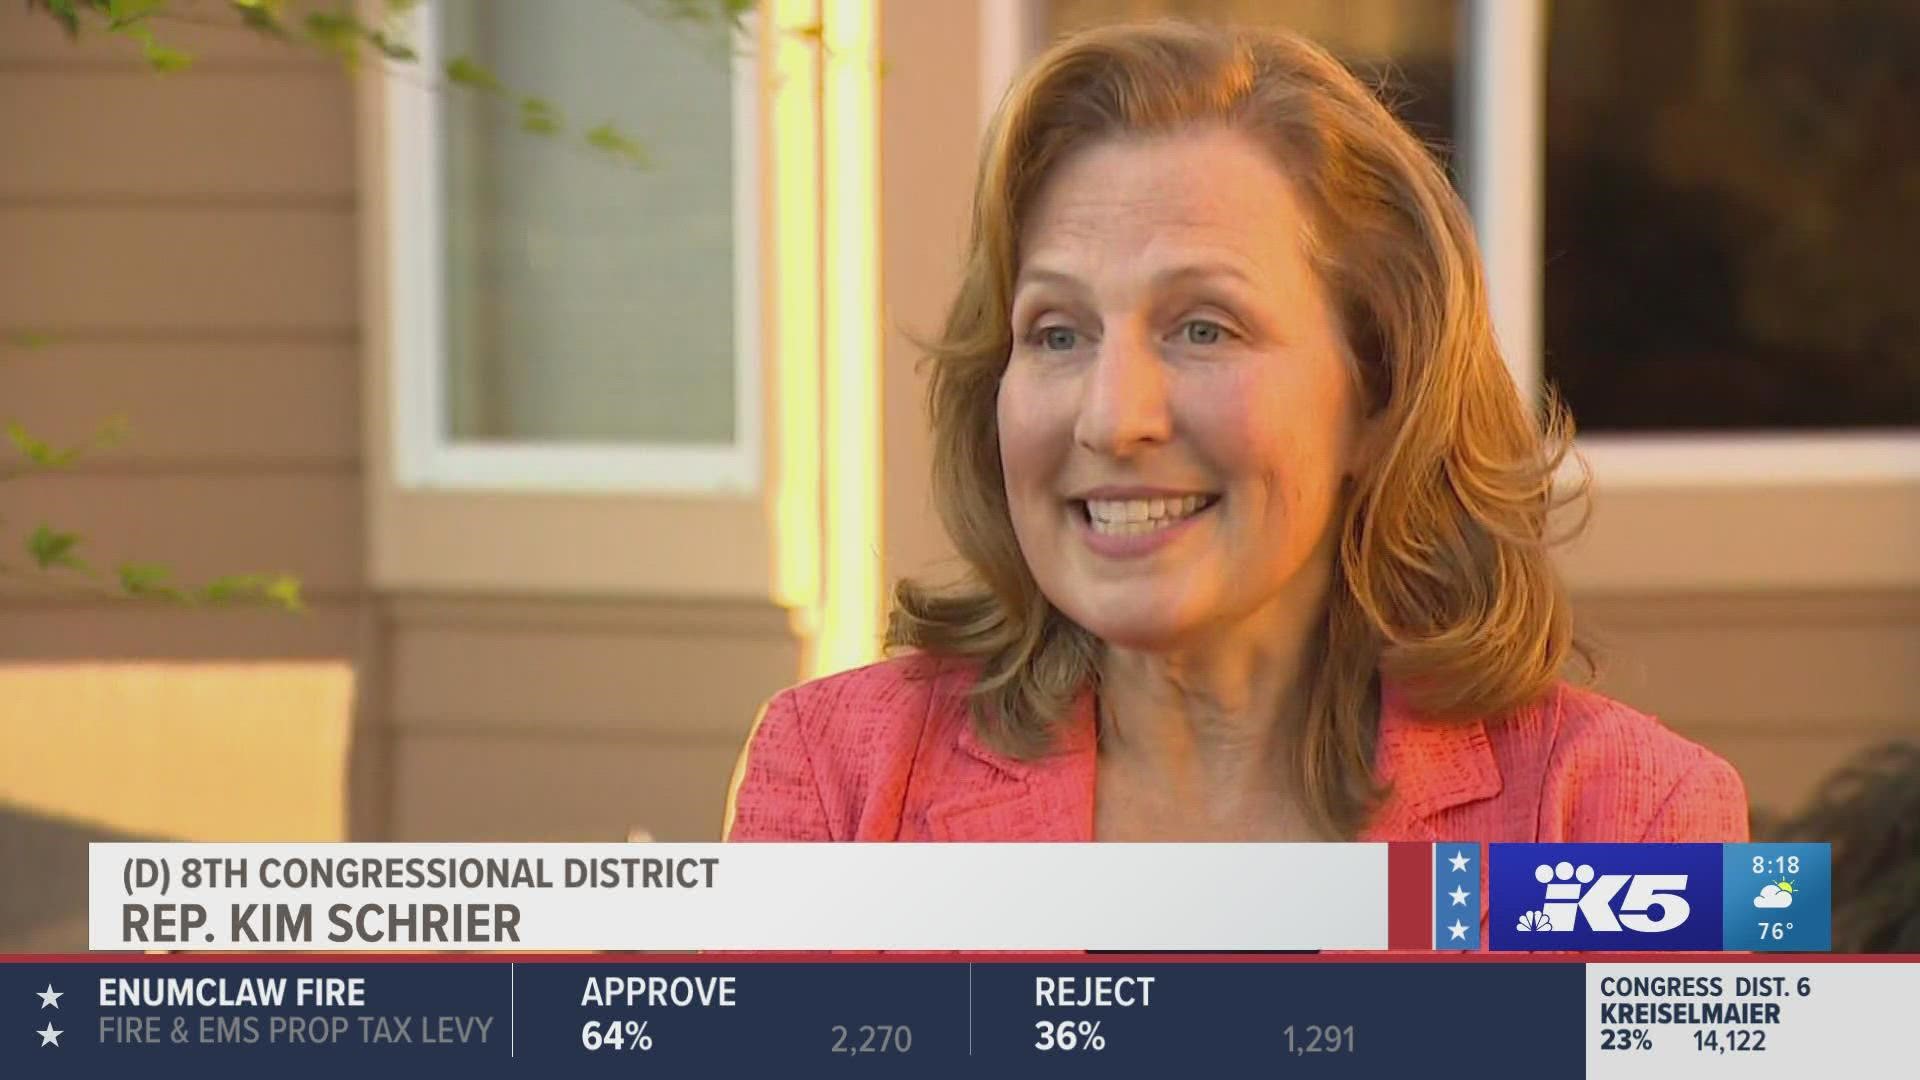 Congresswoman Kim Schrier is leading in the primary race for the 8th legislative district seat with 49% of the vote after initial returns on Tuesday.